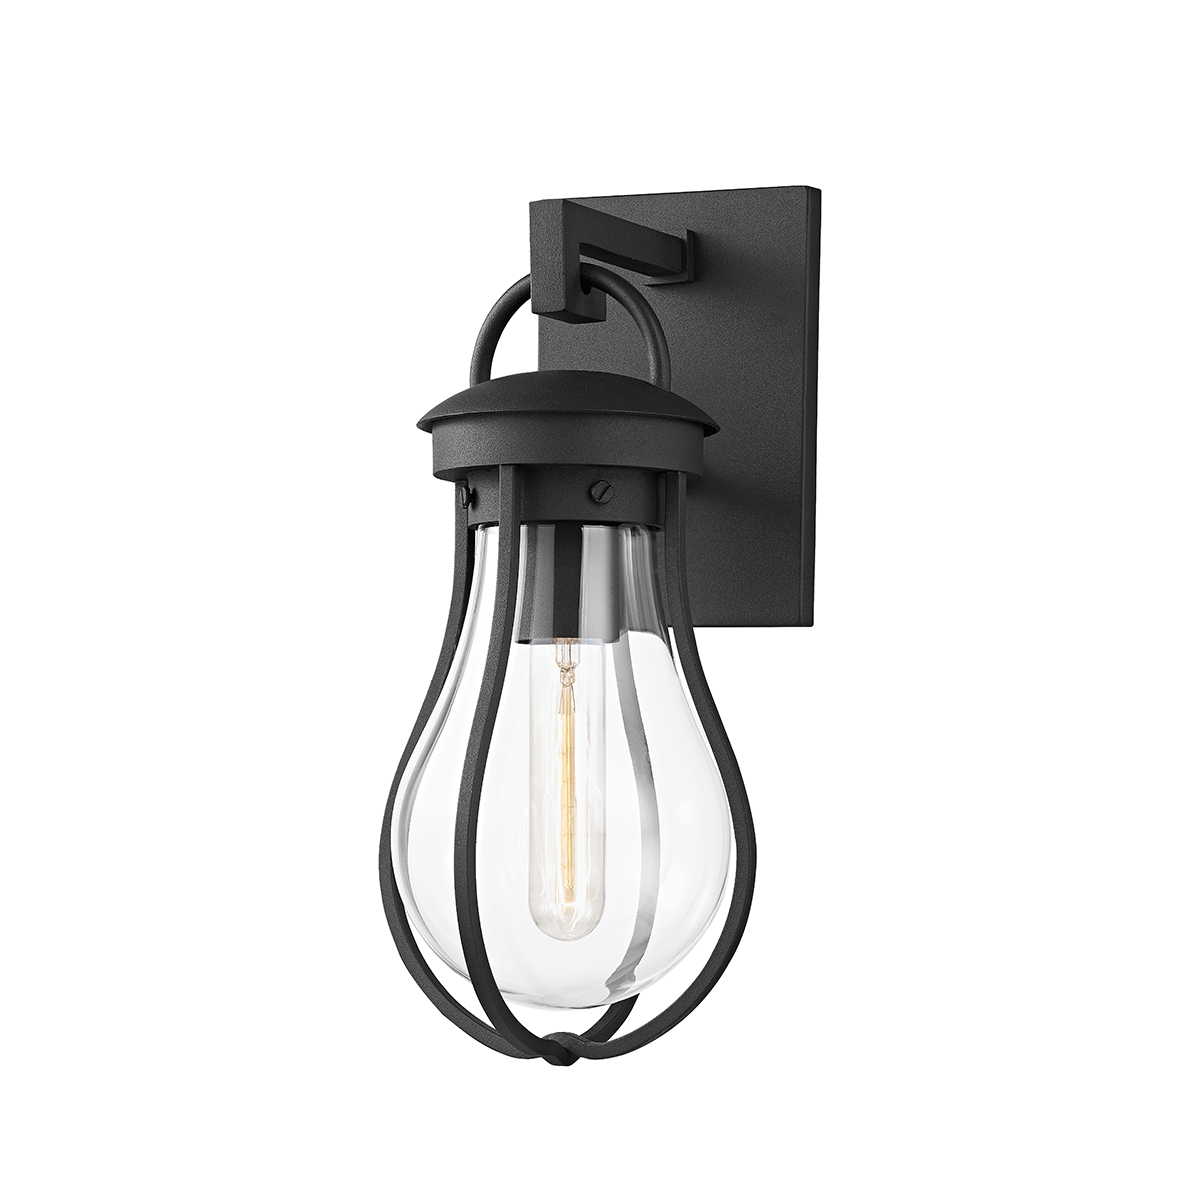 Troy BOWIE 1 LIGHT SMALL EXTERIOR WALL SCONCE B9314 Outdoor l Wall Troy Lighting TEXTURE BLACK  